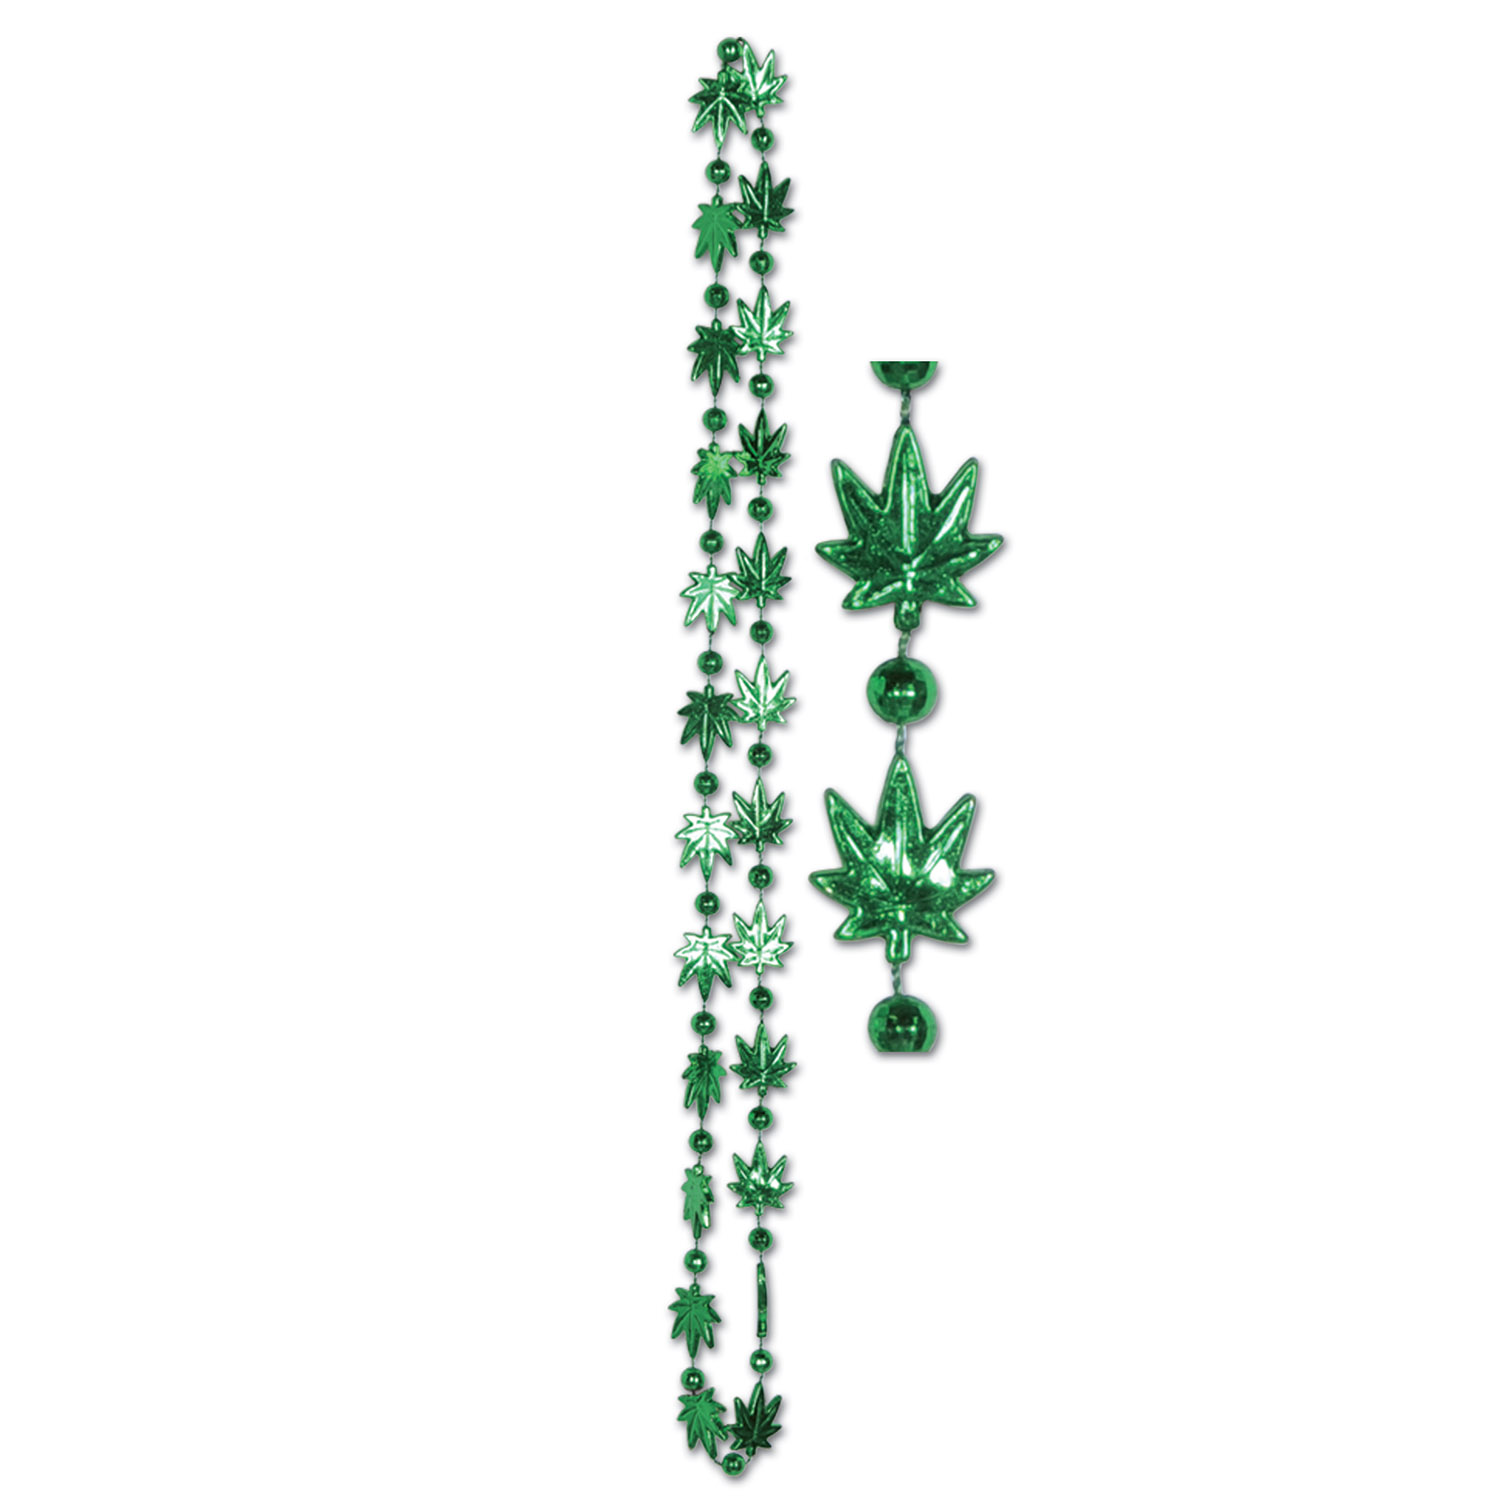 12 Wholesale Weed Beads